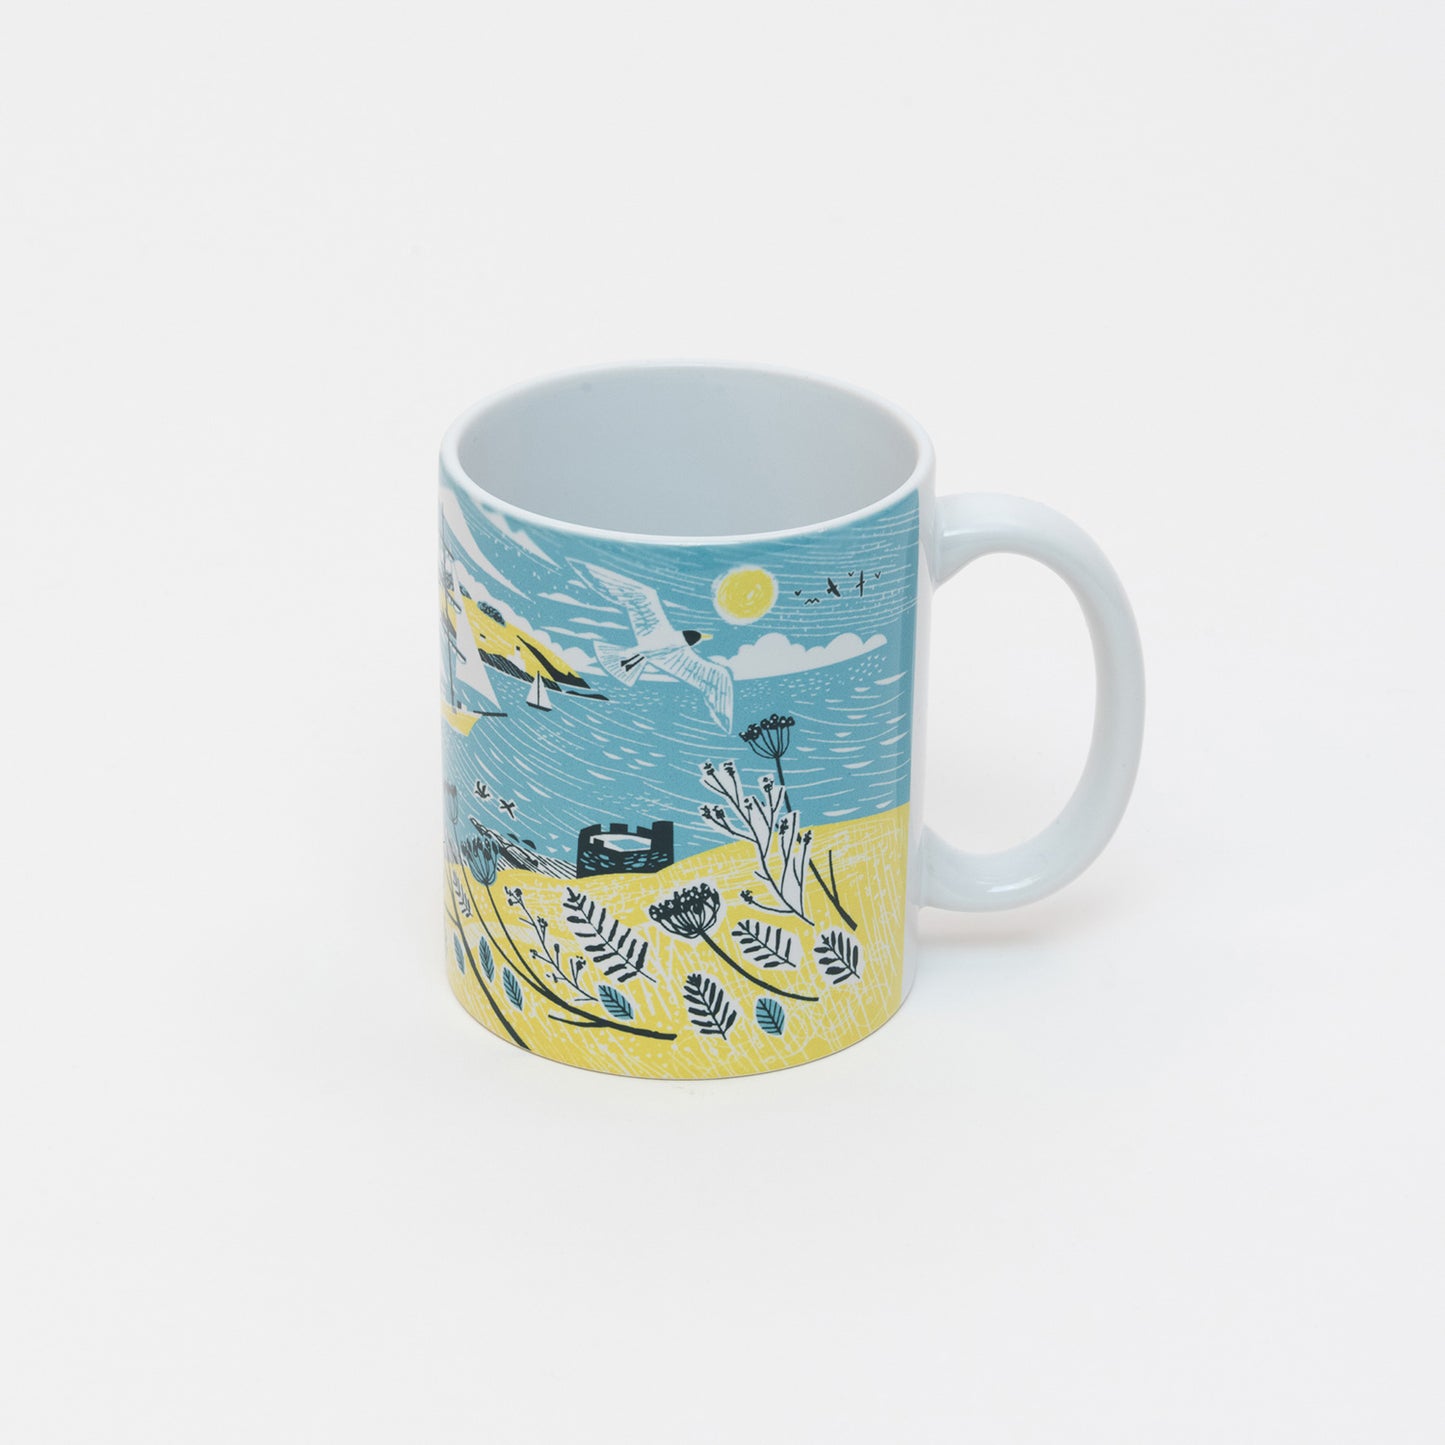 Back of the Falmouth Tall Ships Mug featuring an illustration of a tall ship in full sail in blue, yellow and white.